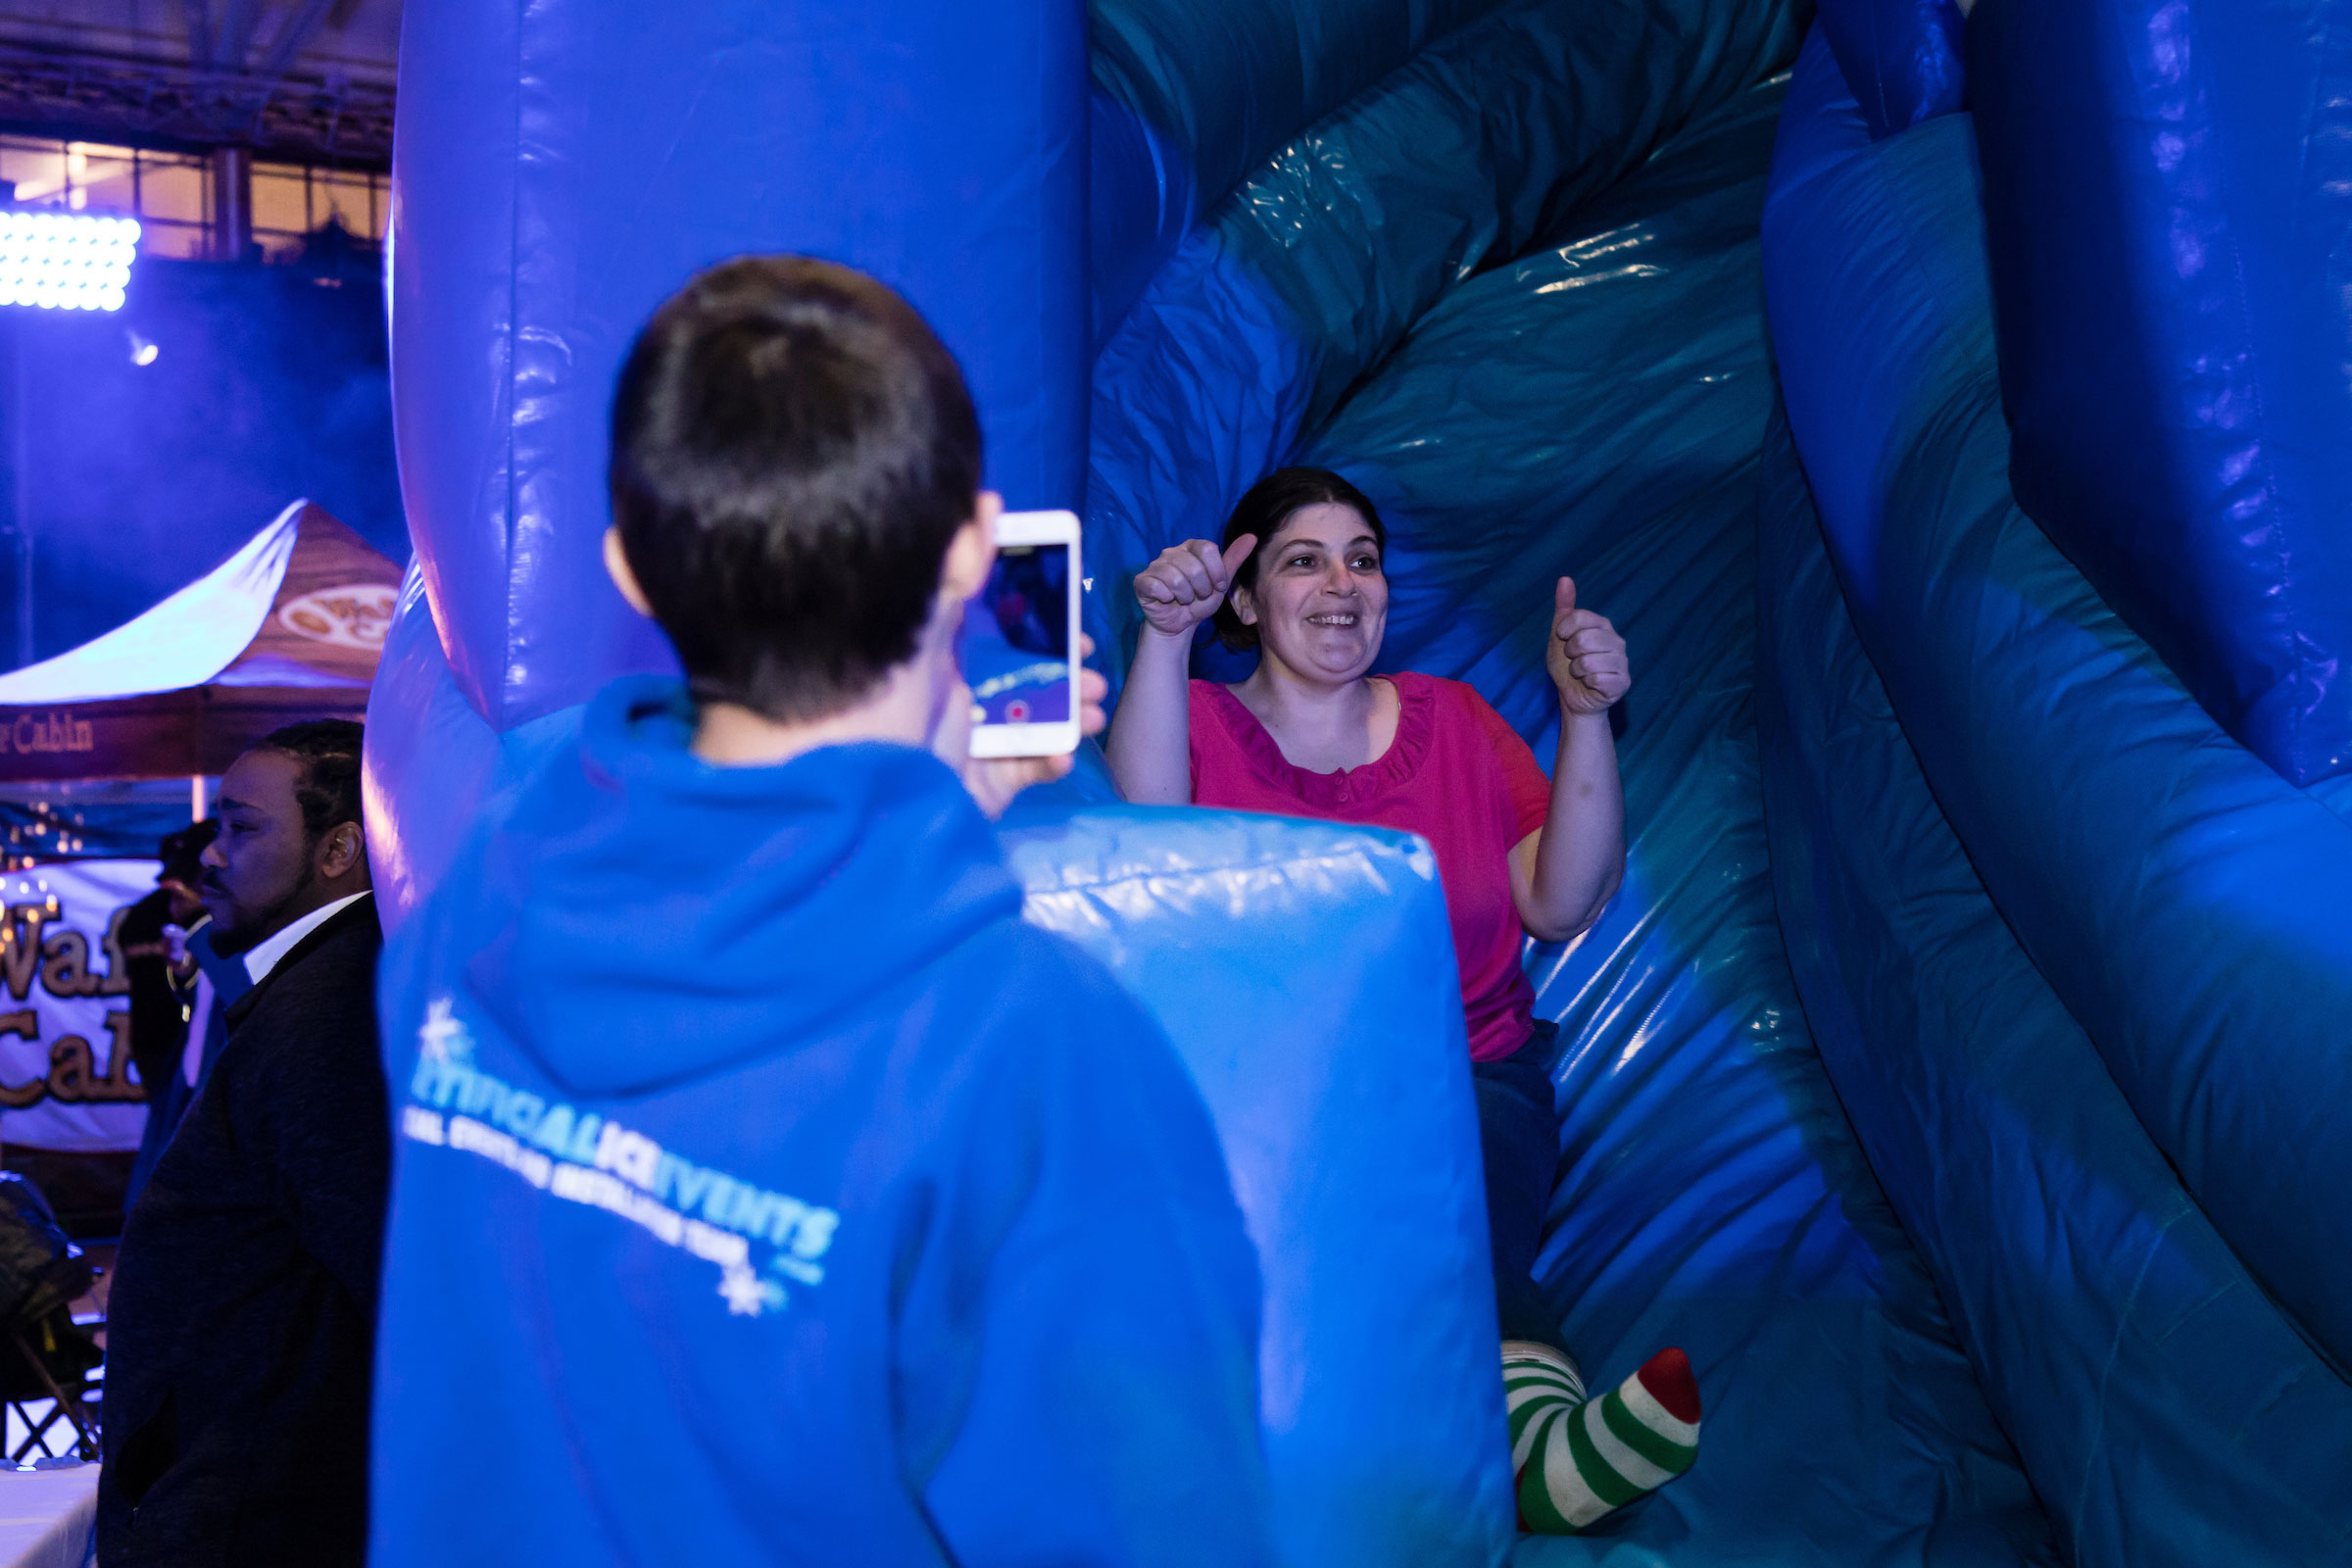 A woman rides the inflatable slide